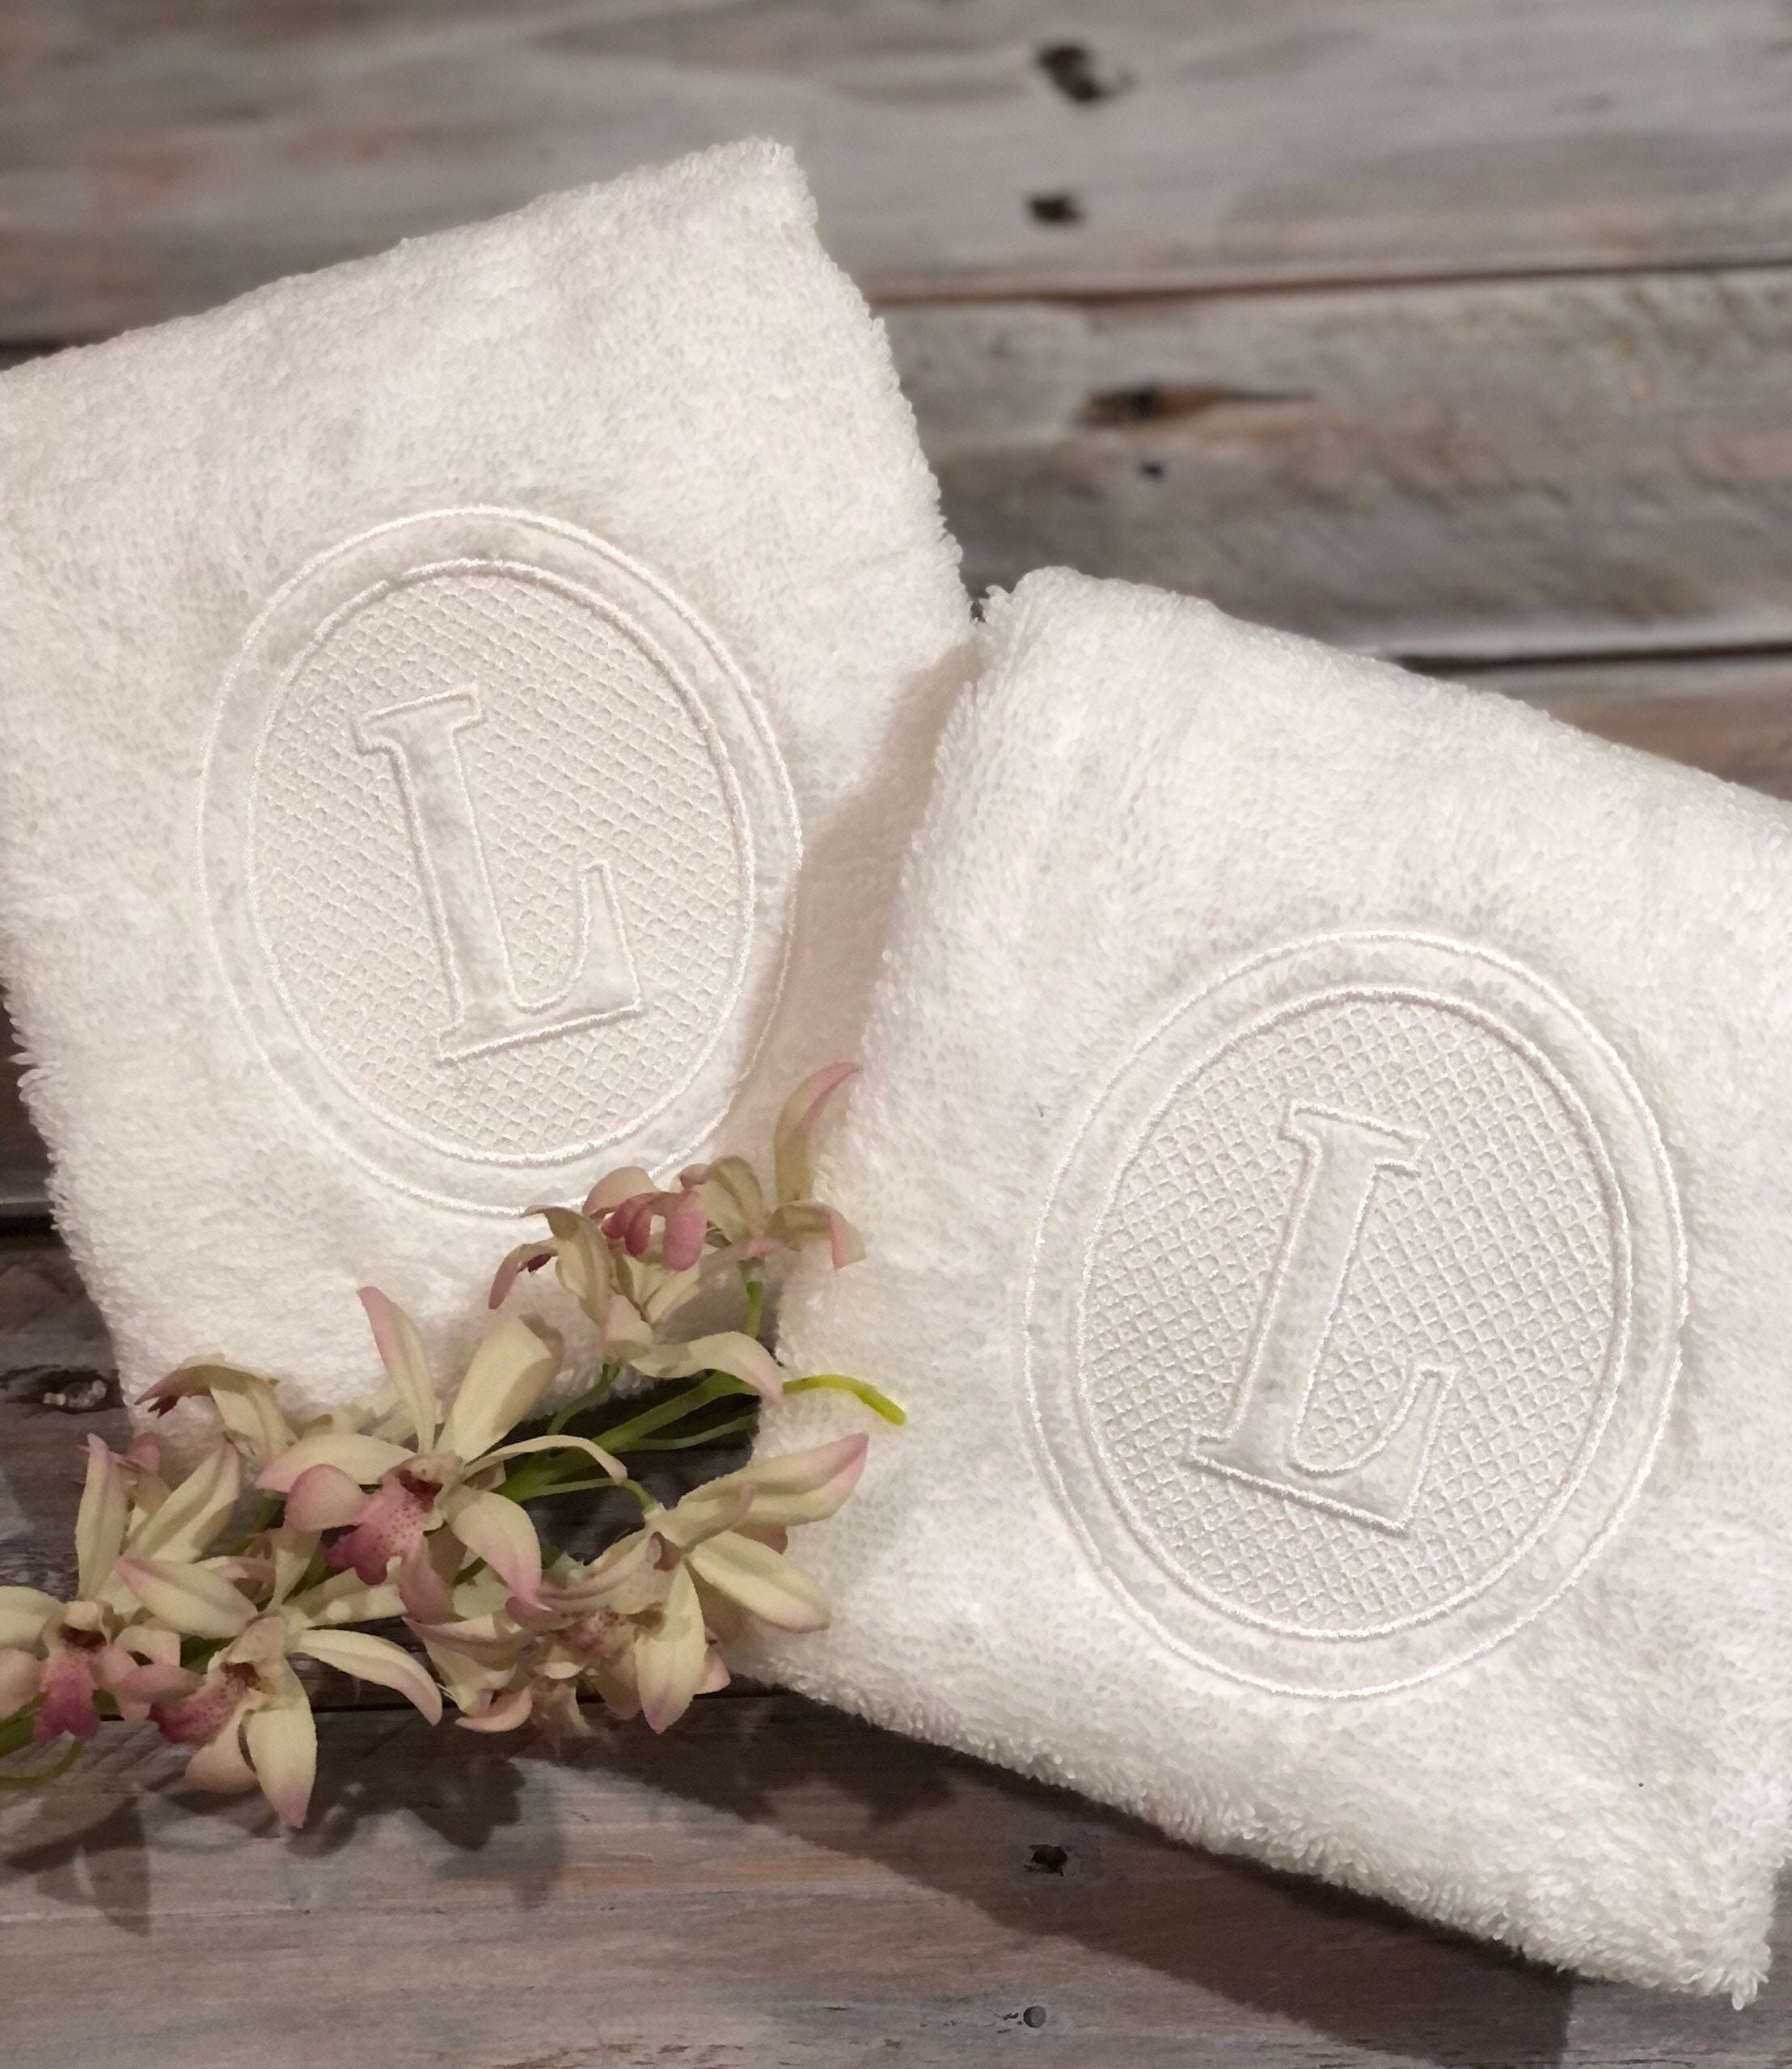 CHANEL Hand Towel Set of 3 Colors in Box Promo Gift